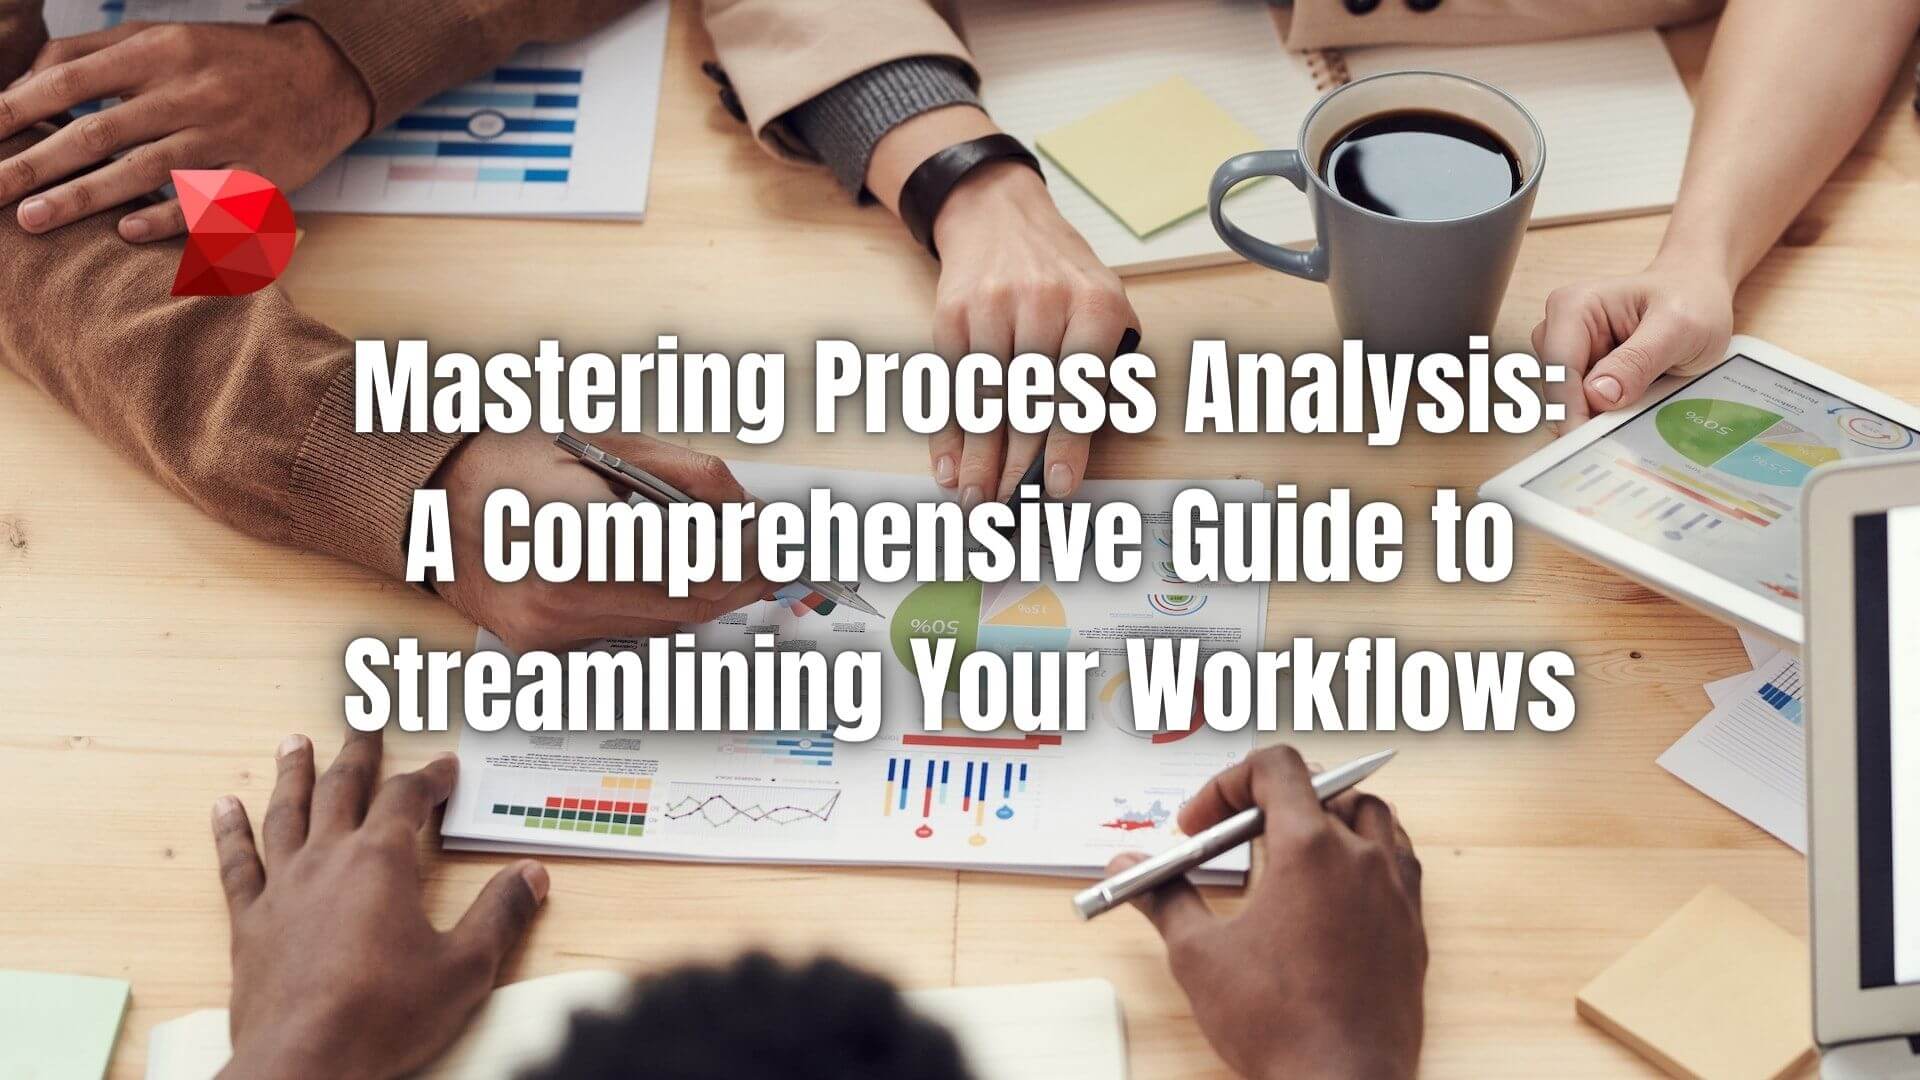 Process analysis is critical for any business looking to increase efficiency and reduce costs. Learn more about process analysis techniques.